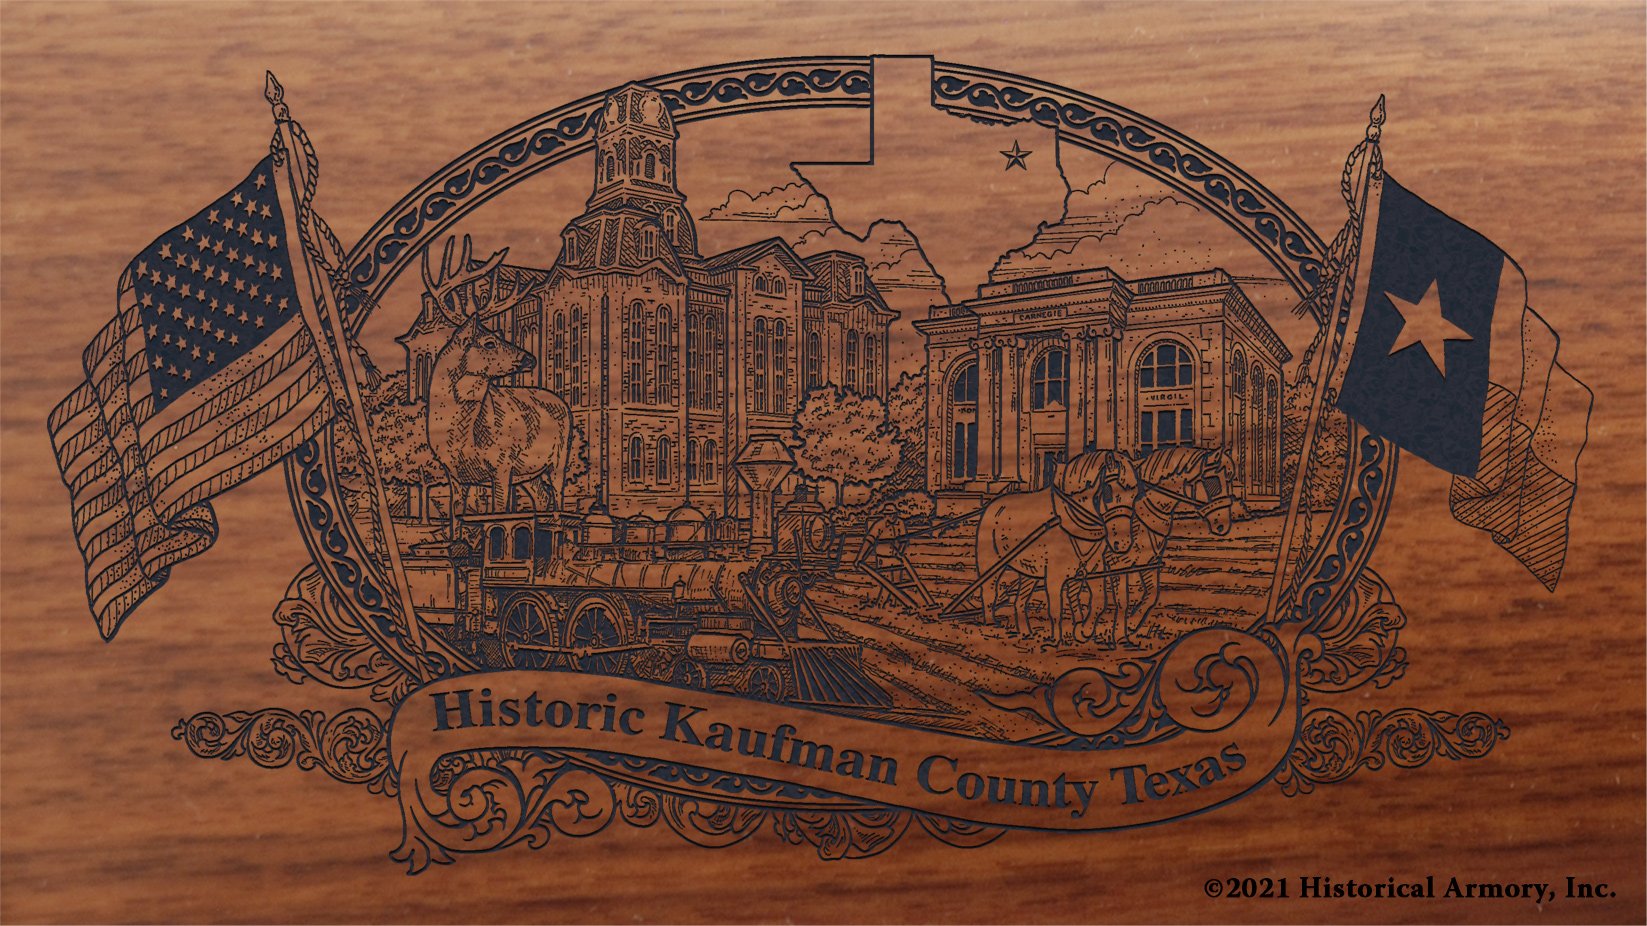 Engraved artwork | History of Kaufman County Texas | Historical Armory